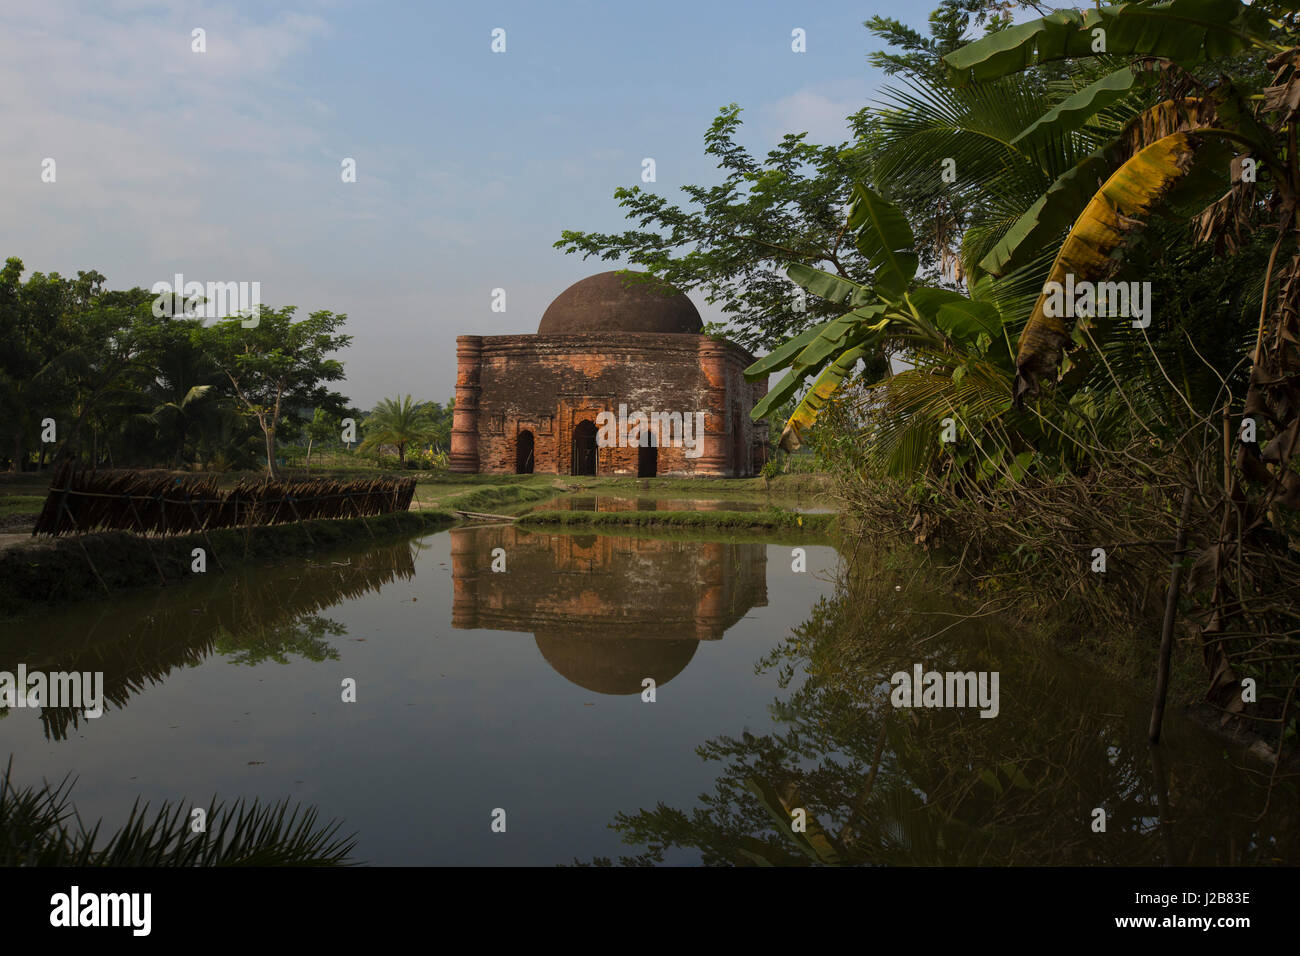 Chunakhola Mosque The single-domed square mosque, located about a mile away to the northwest of the Sixty Dome Mosque at Bagerhat, derives its name fr Stock Photo